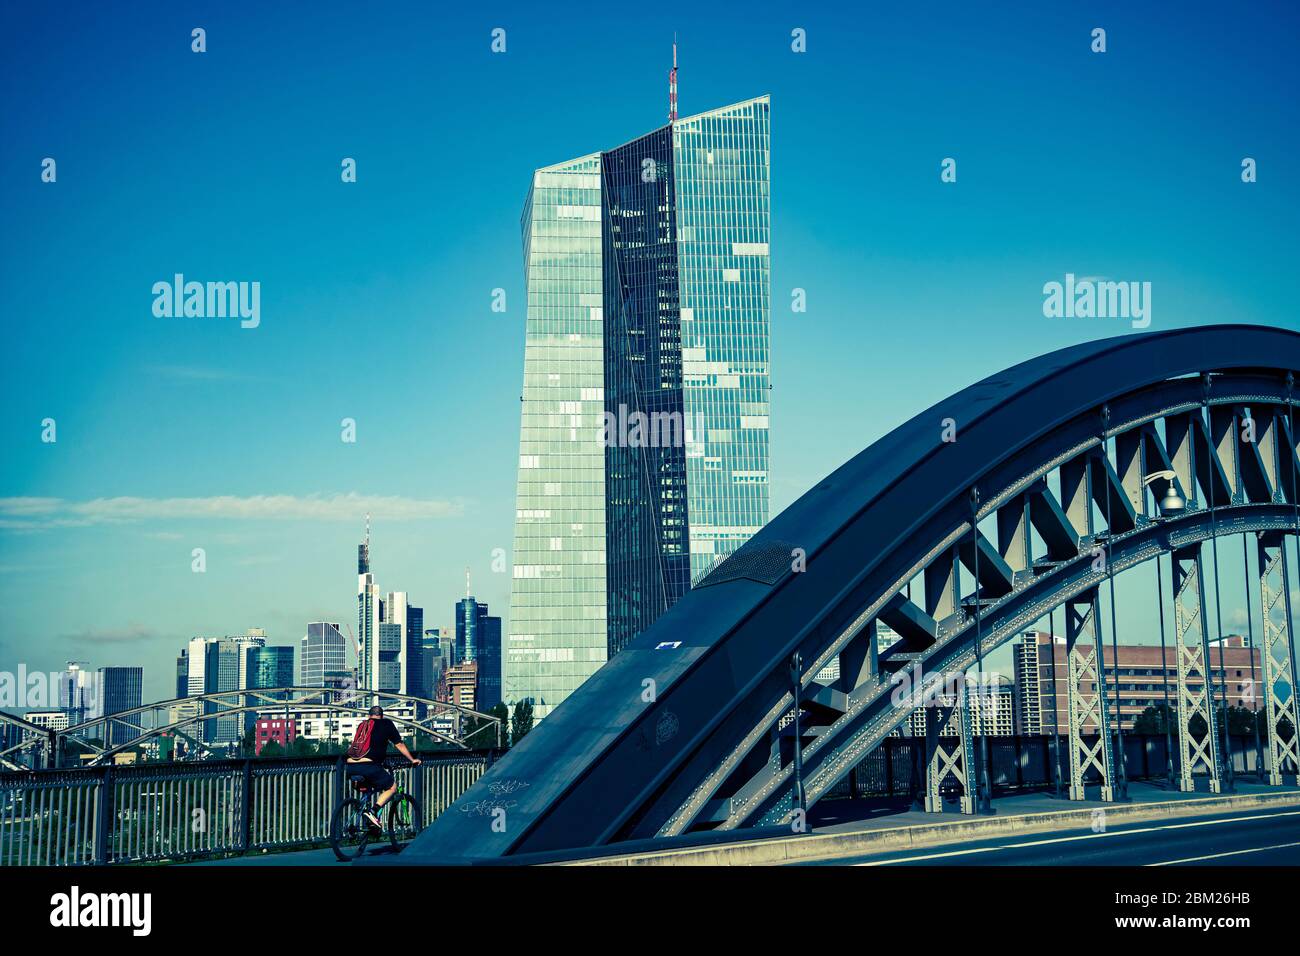 View from the Osthafen Bridge to the European Central Bank (ECB) with the skyline of Frankfurt in the background Stock Photo